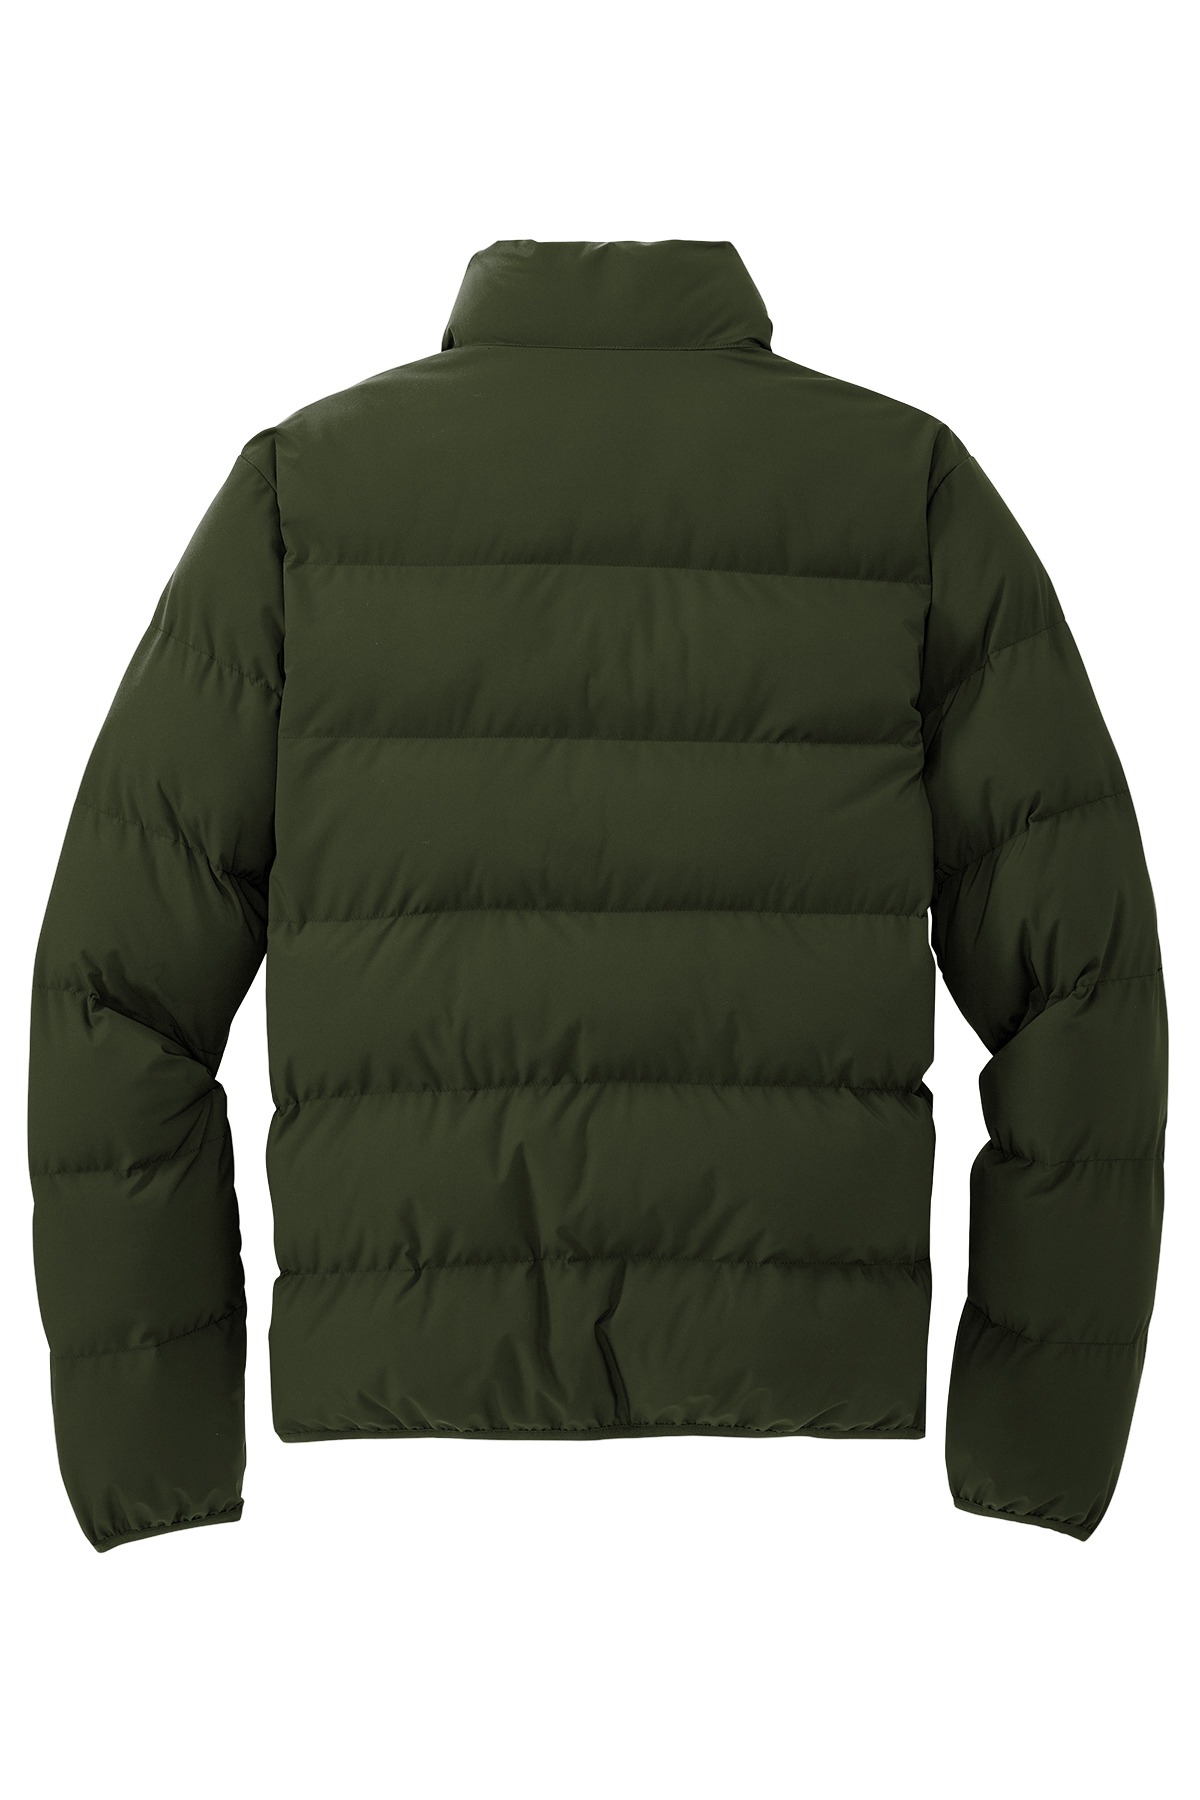 Mercer+Mettle Puffy Jacket | Product | Company Casuals